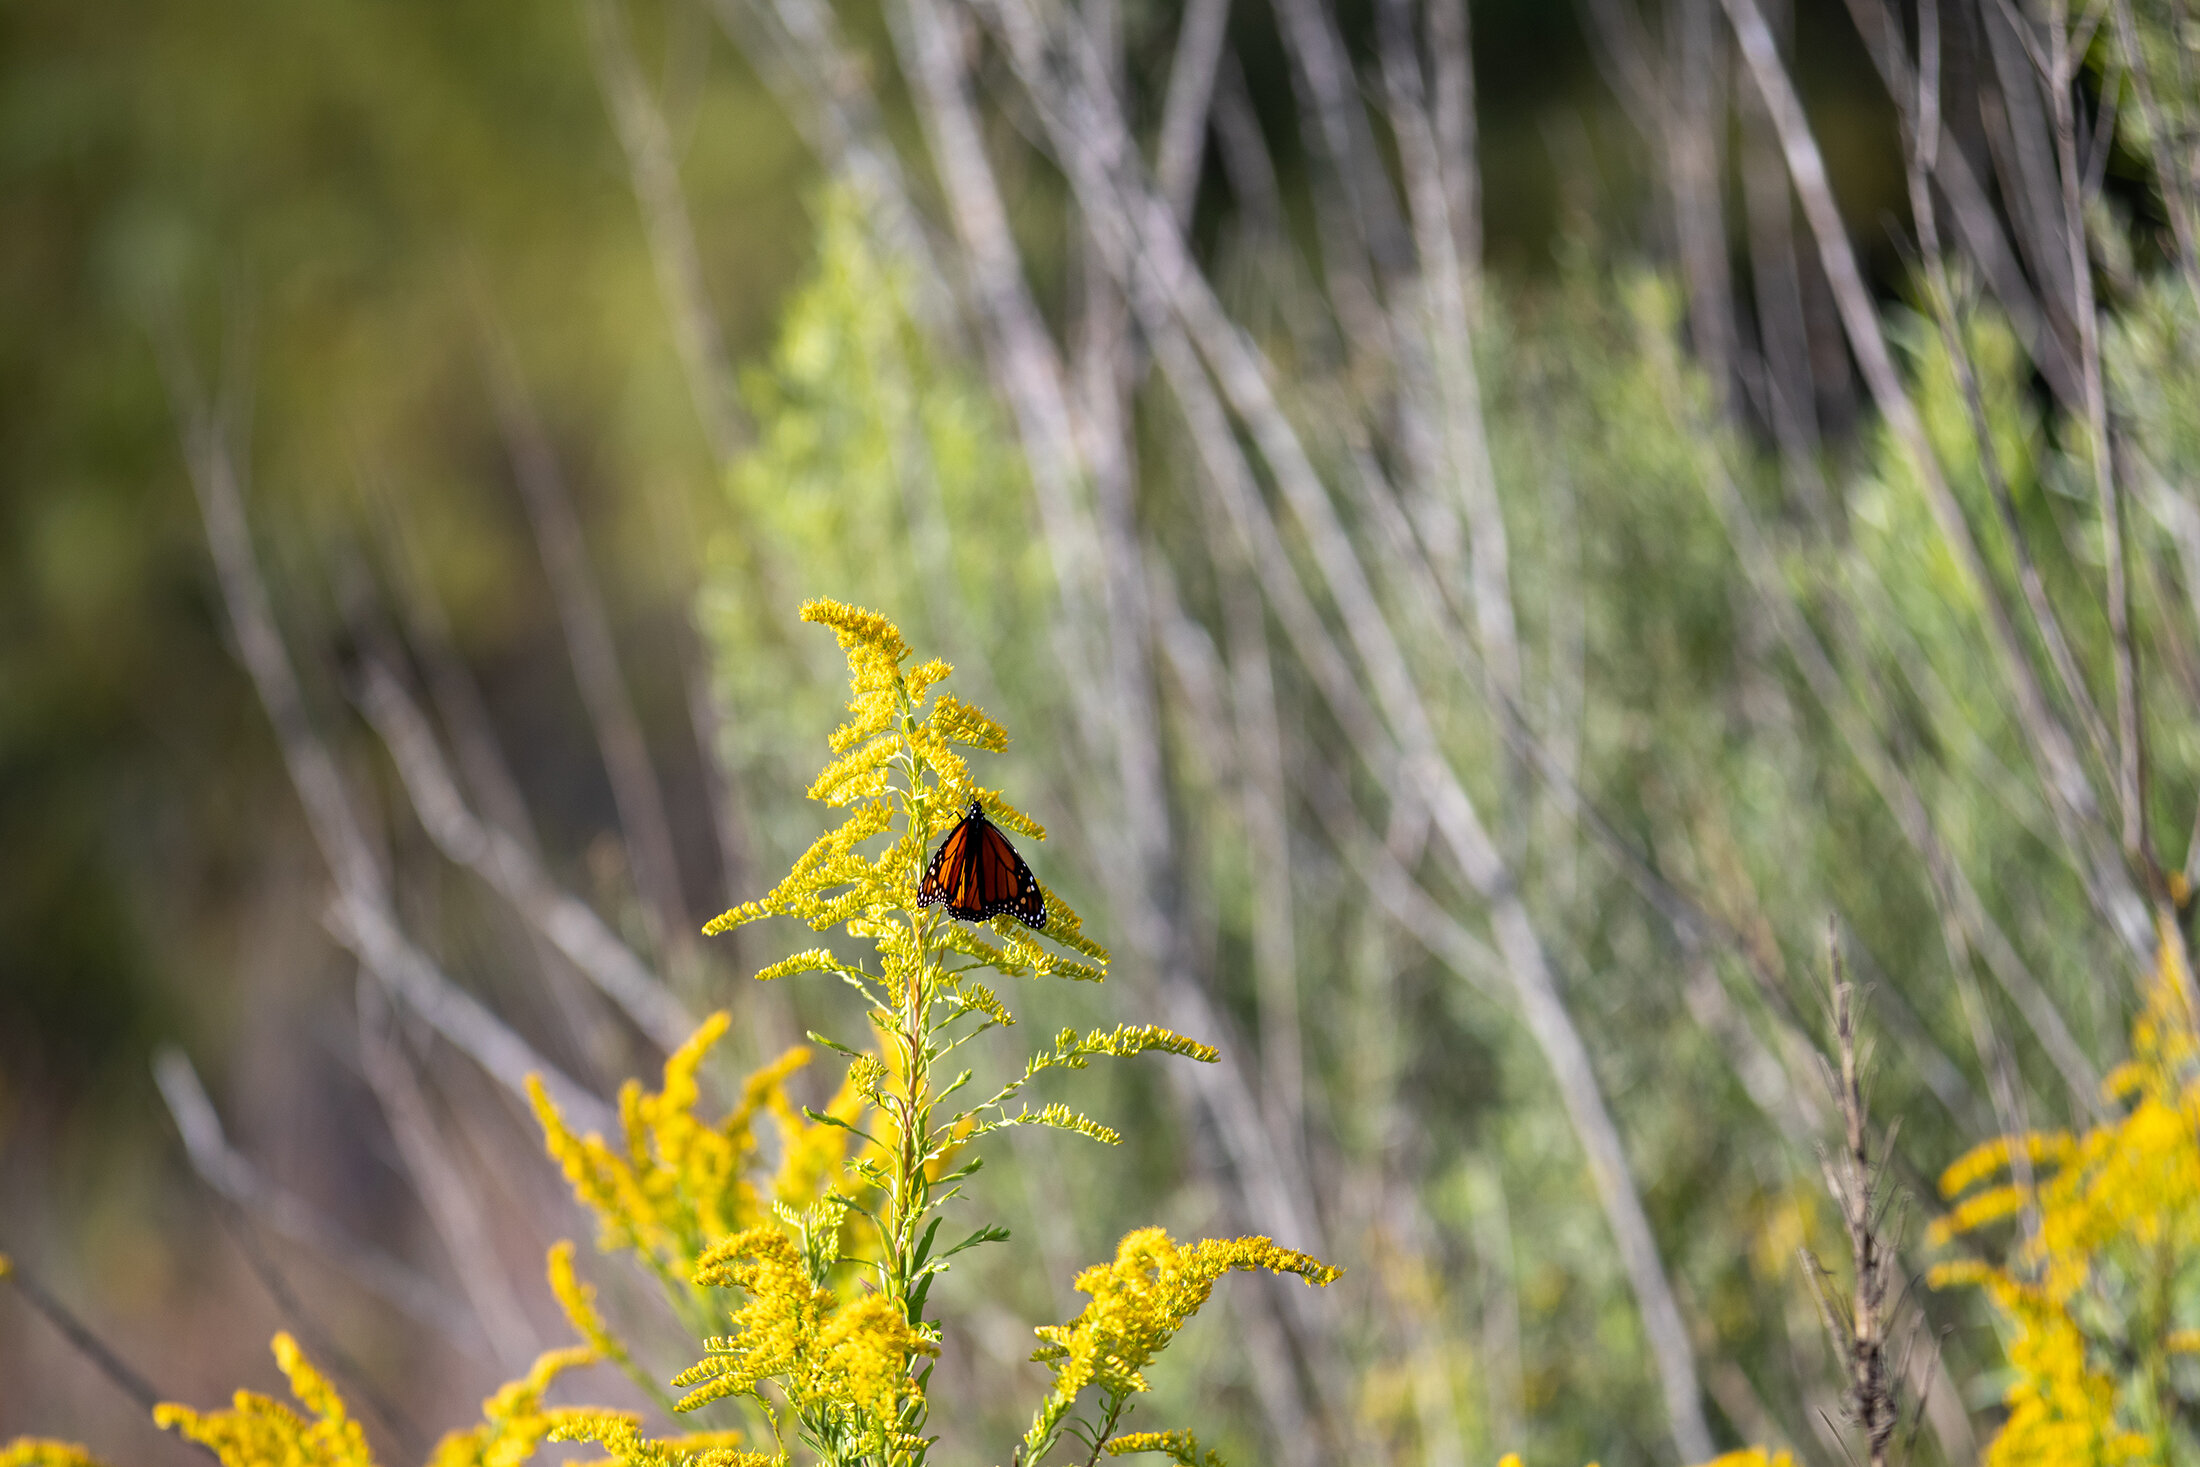 A monarch butterfly lands on a stalk of wild goldenrod.